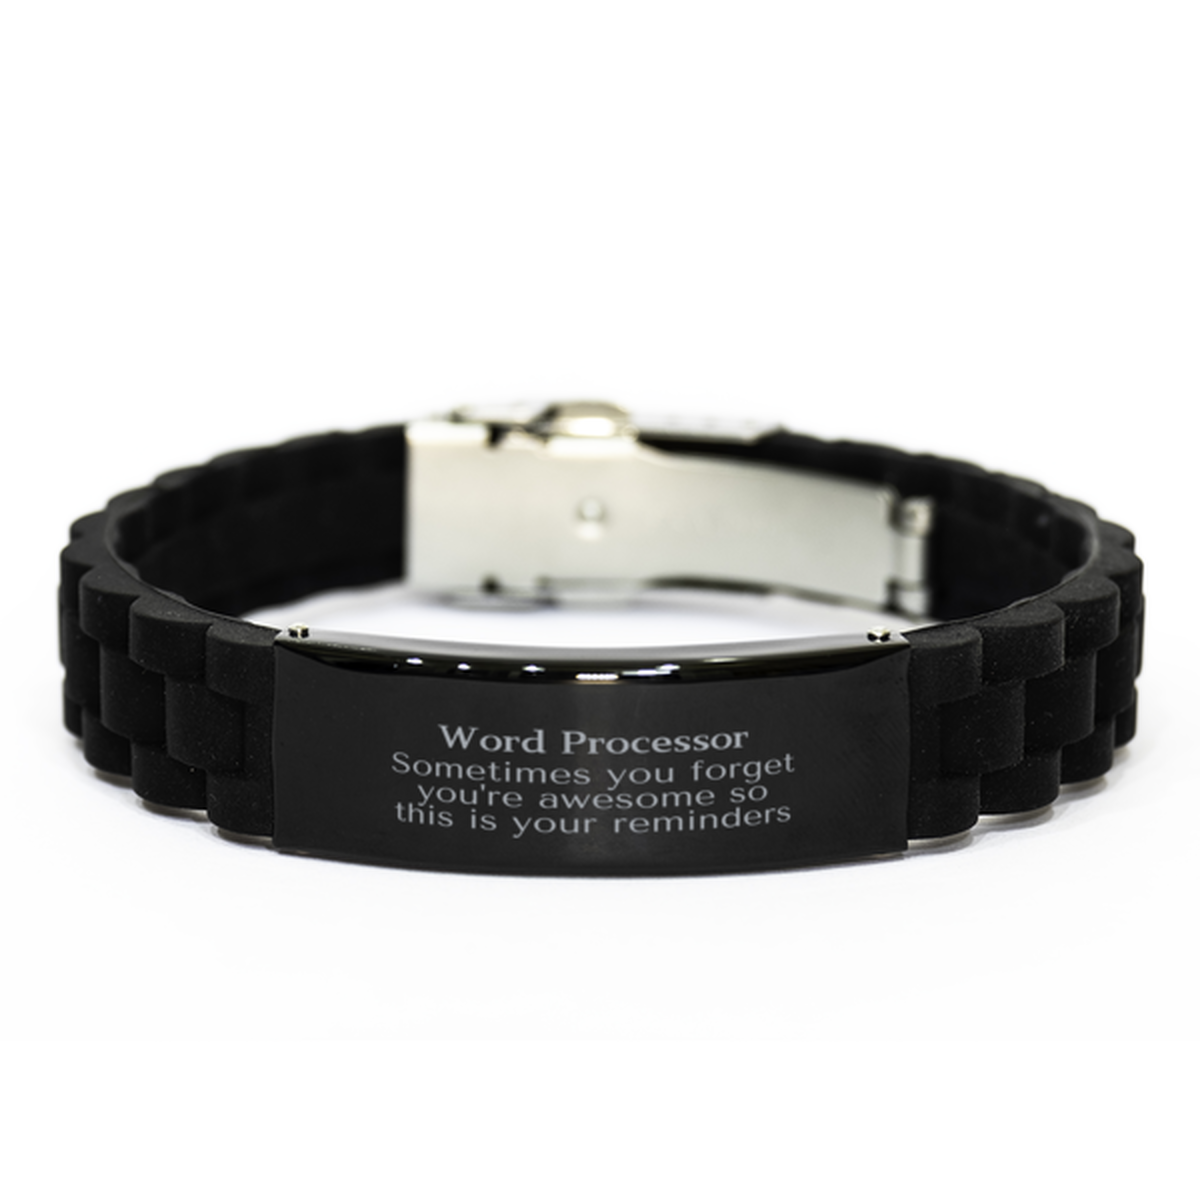 Sentimental Word Processor Black Glidelock Clasp Bracelet, Word Processor Sometimes you forget you're awesome so this is your reminders, Graduation Christmas Birthday Gifts for Word Processor, Men, Women, Coworkers